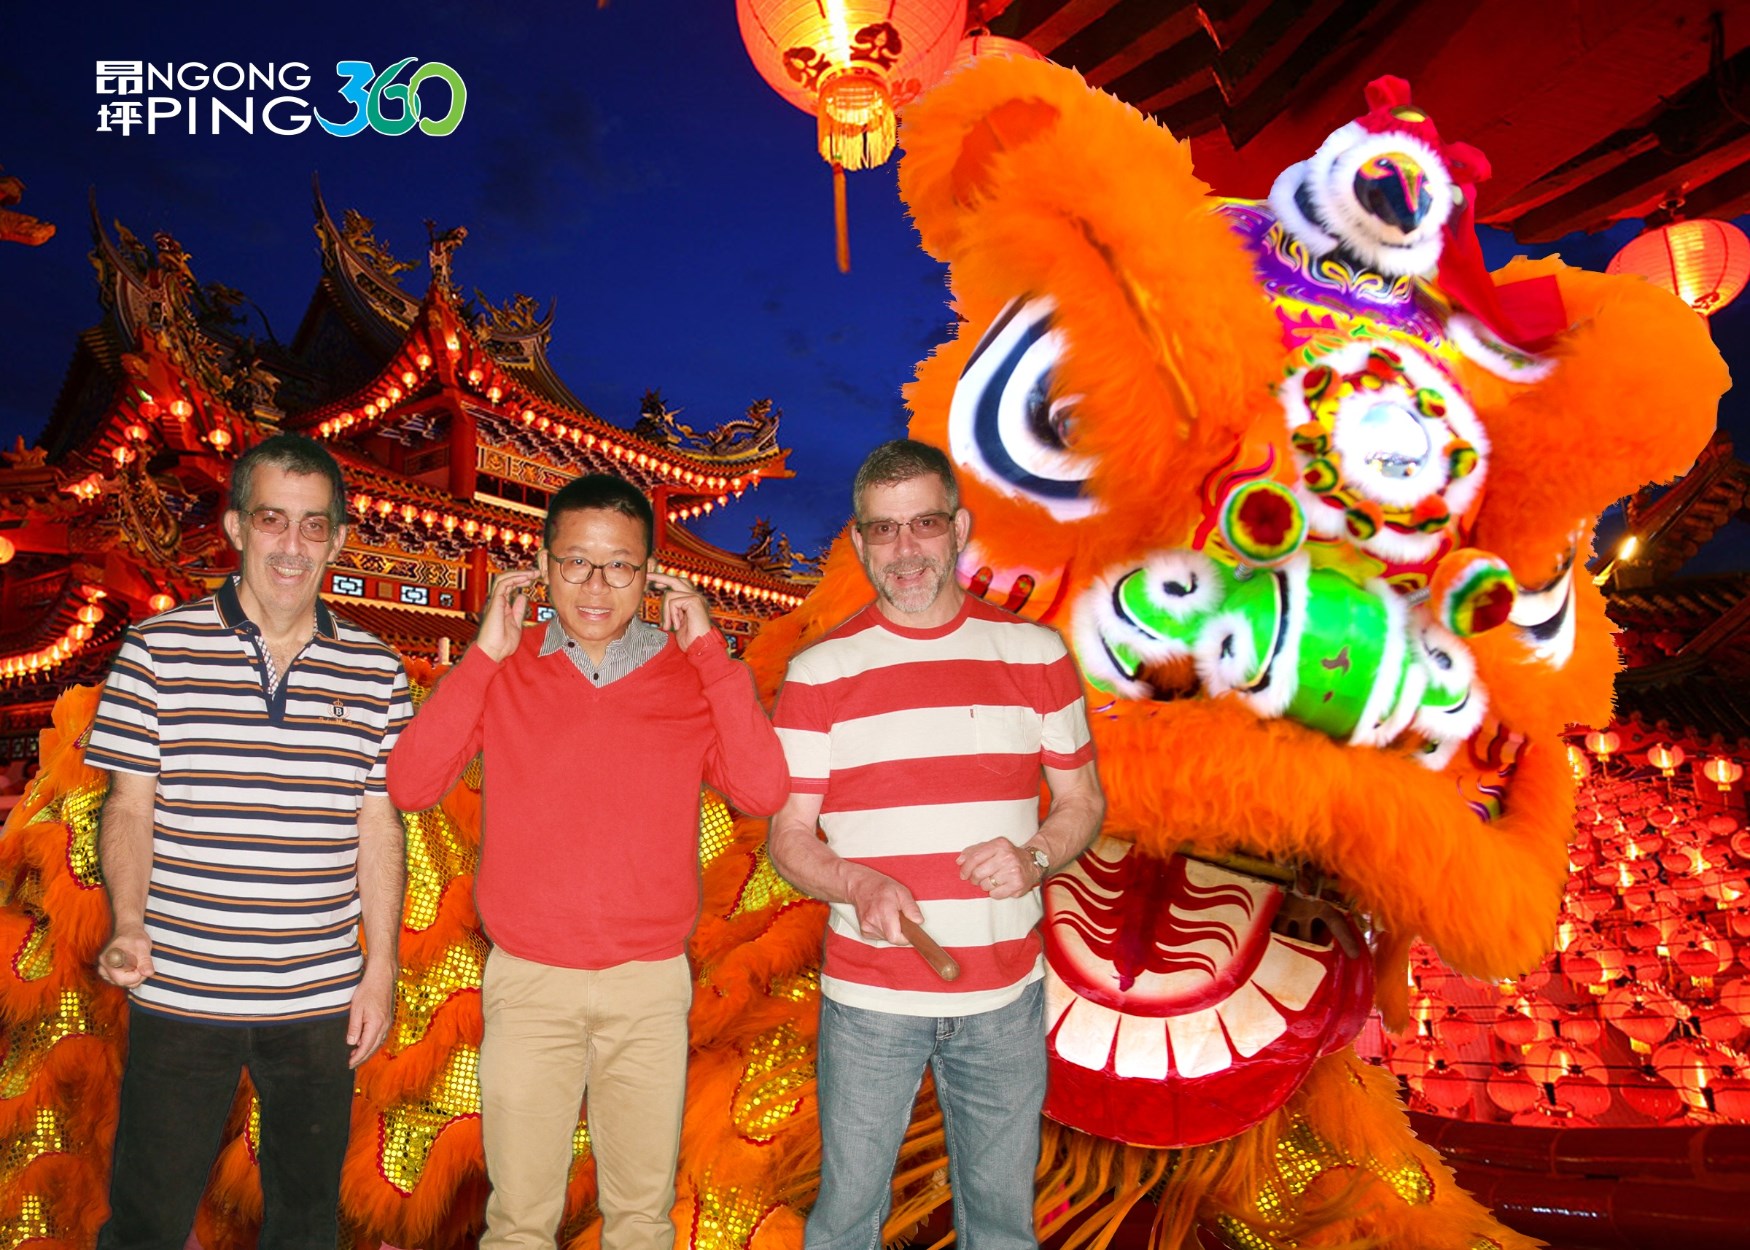 Frank the tour guide takes photo with Marvin Downs and friend at Ngong Ping 360